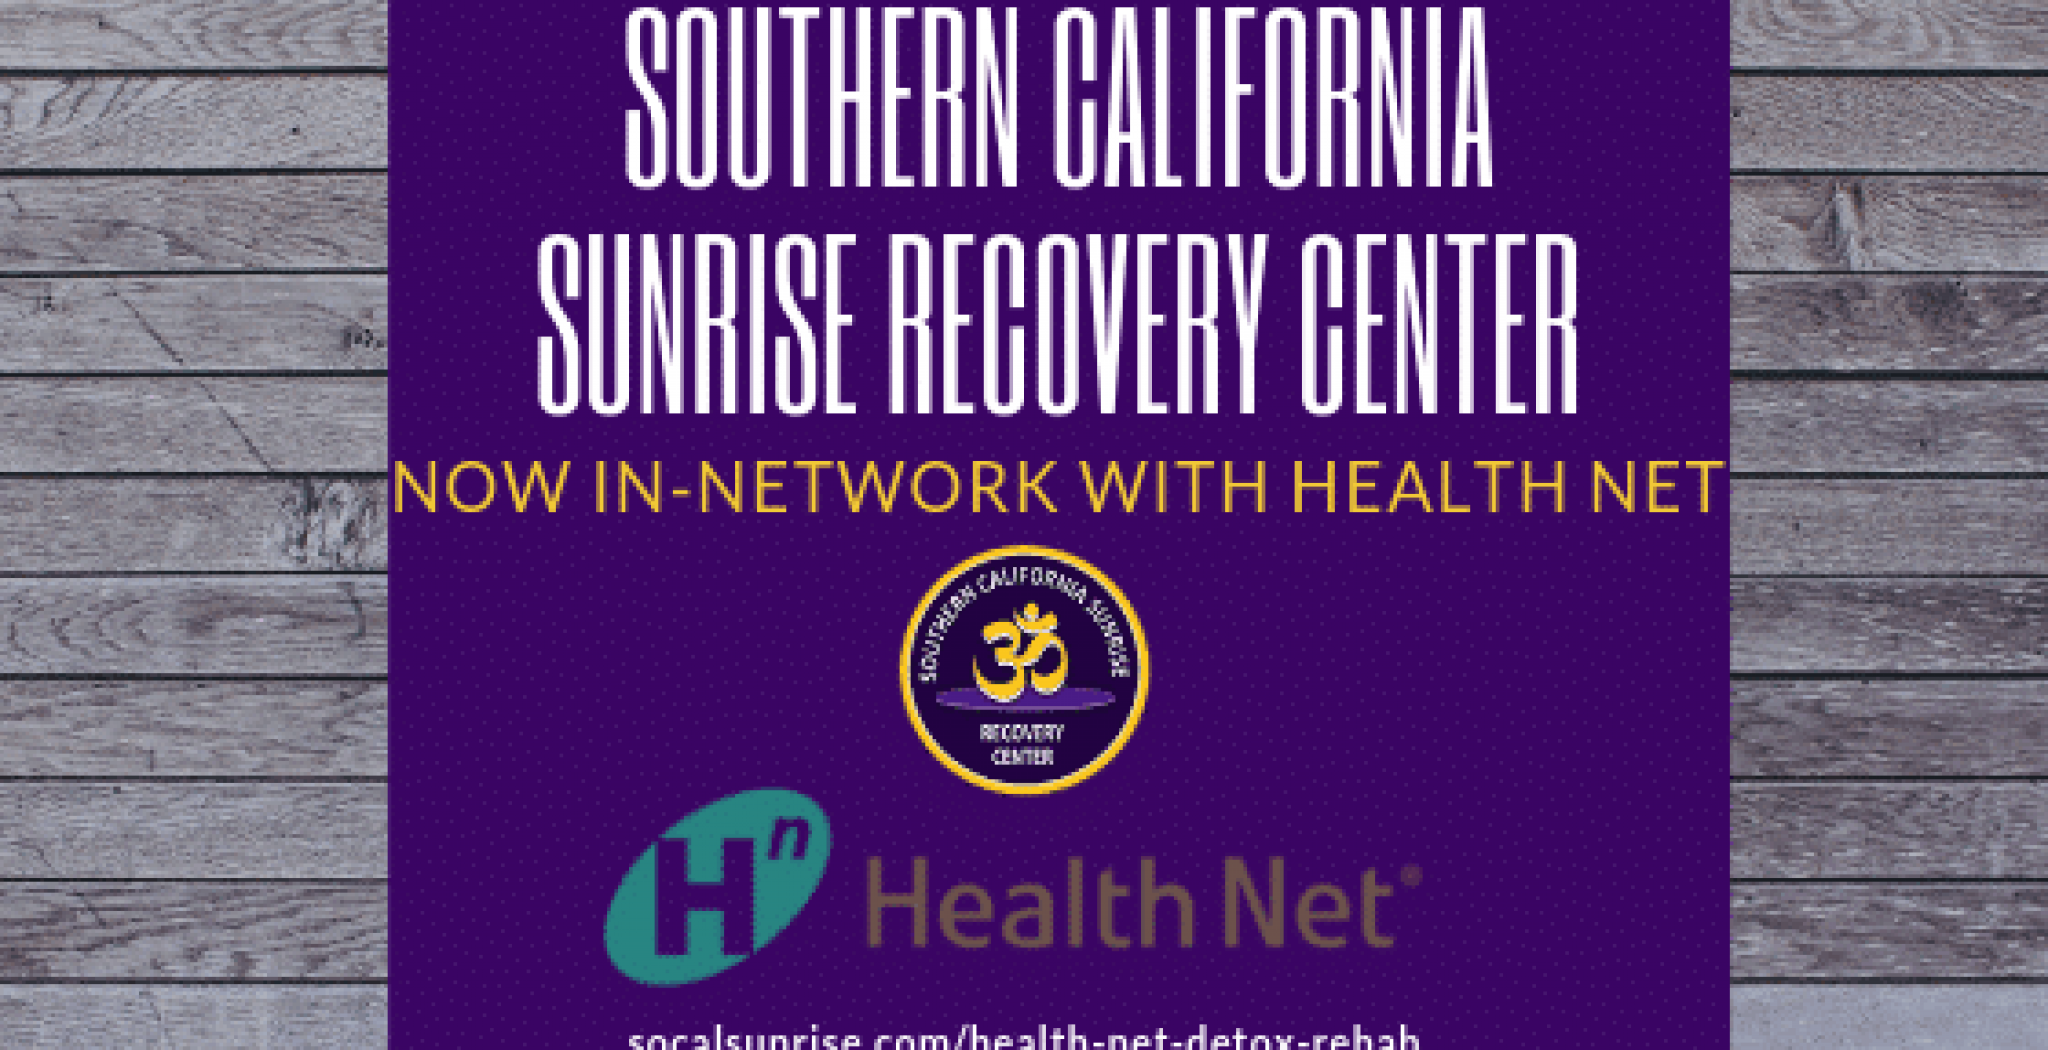 SOUTHERN-CALIFORNIA-SUNRISE-RECOVERY-CENTER-1